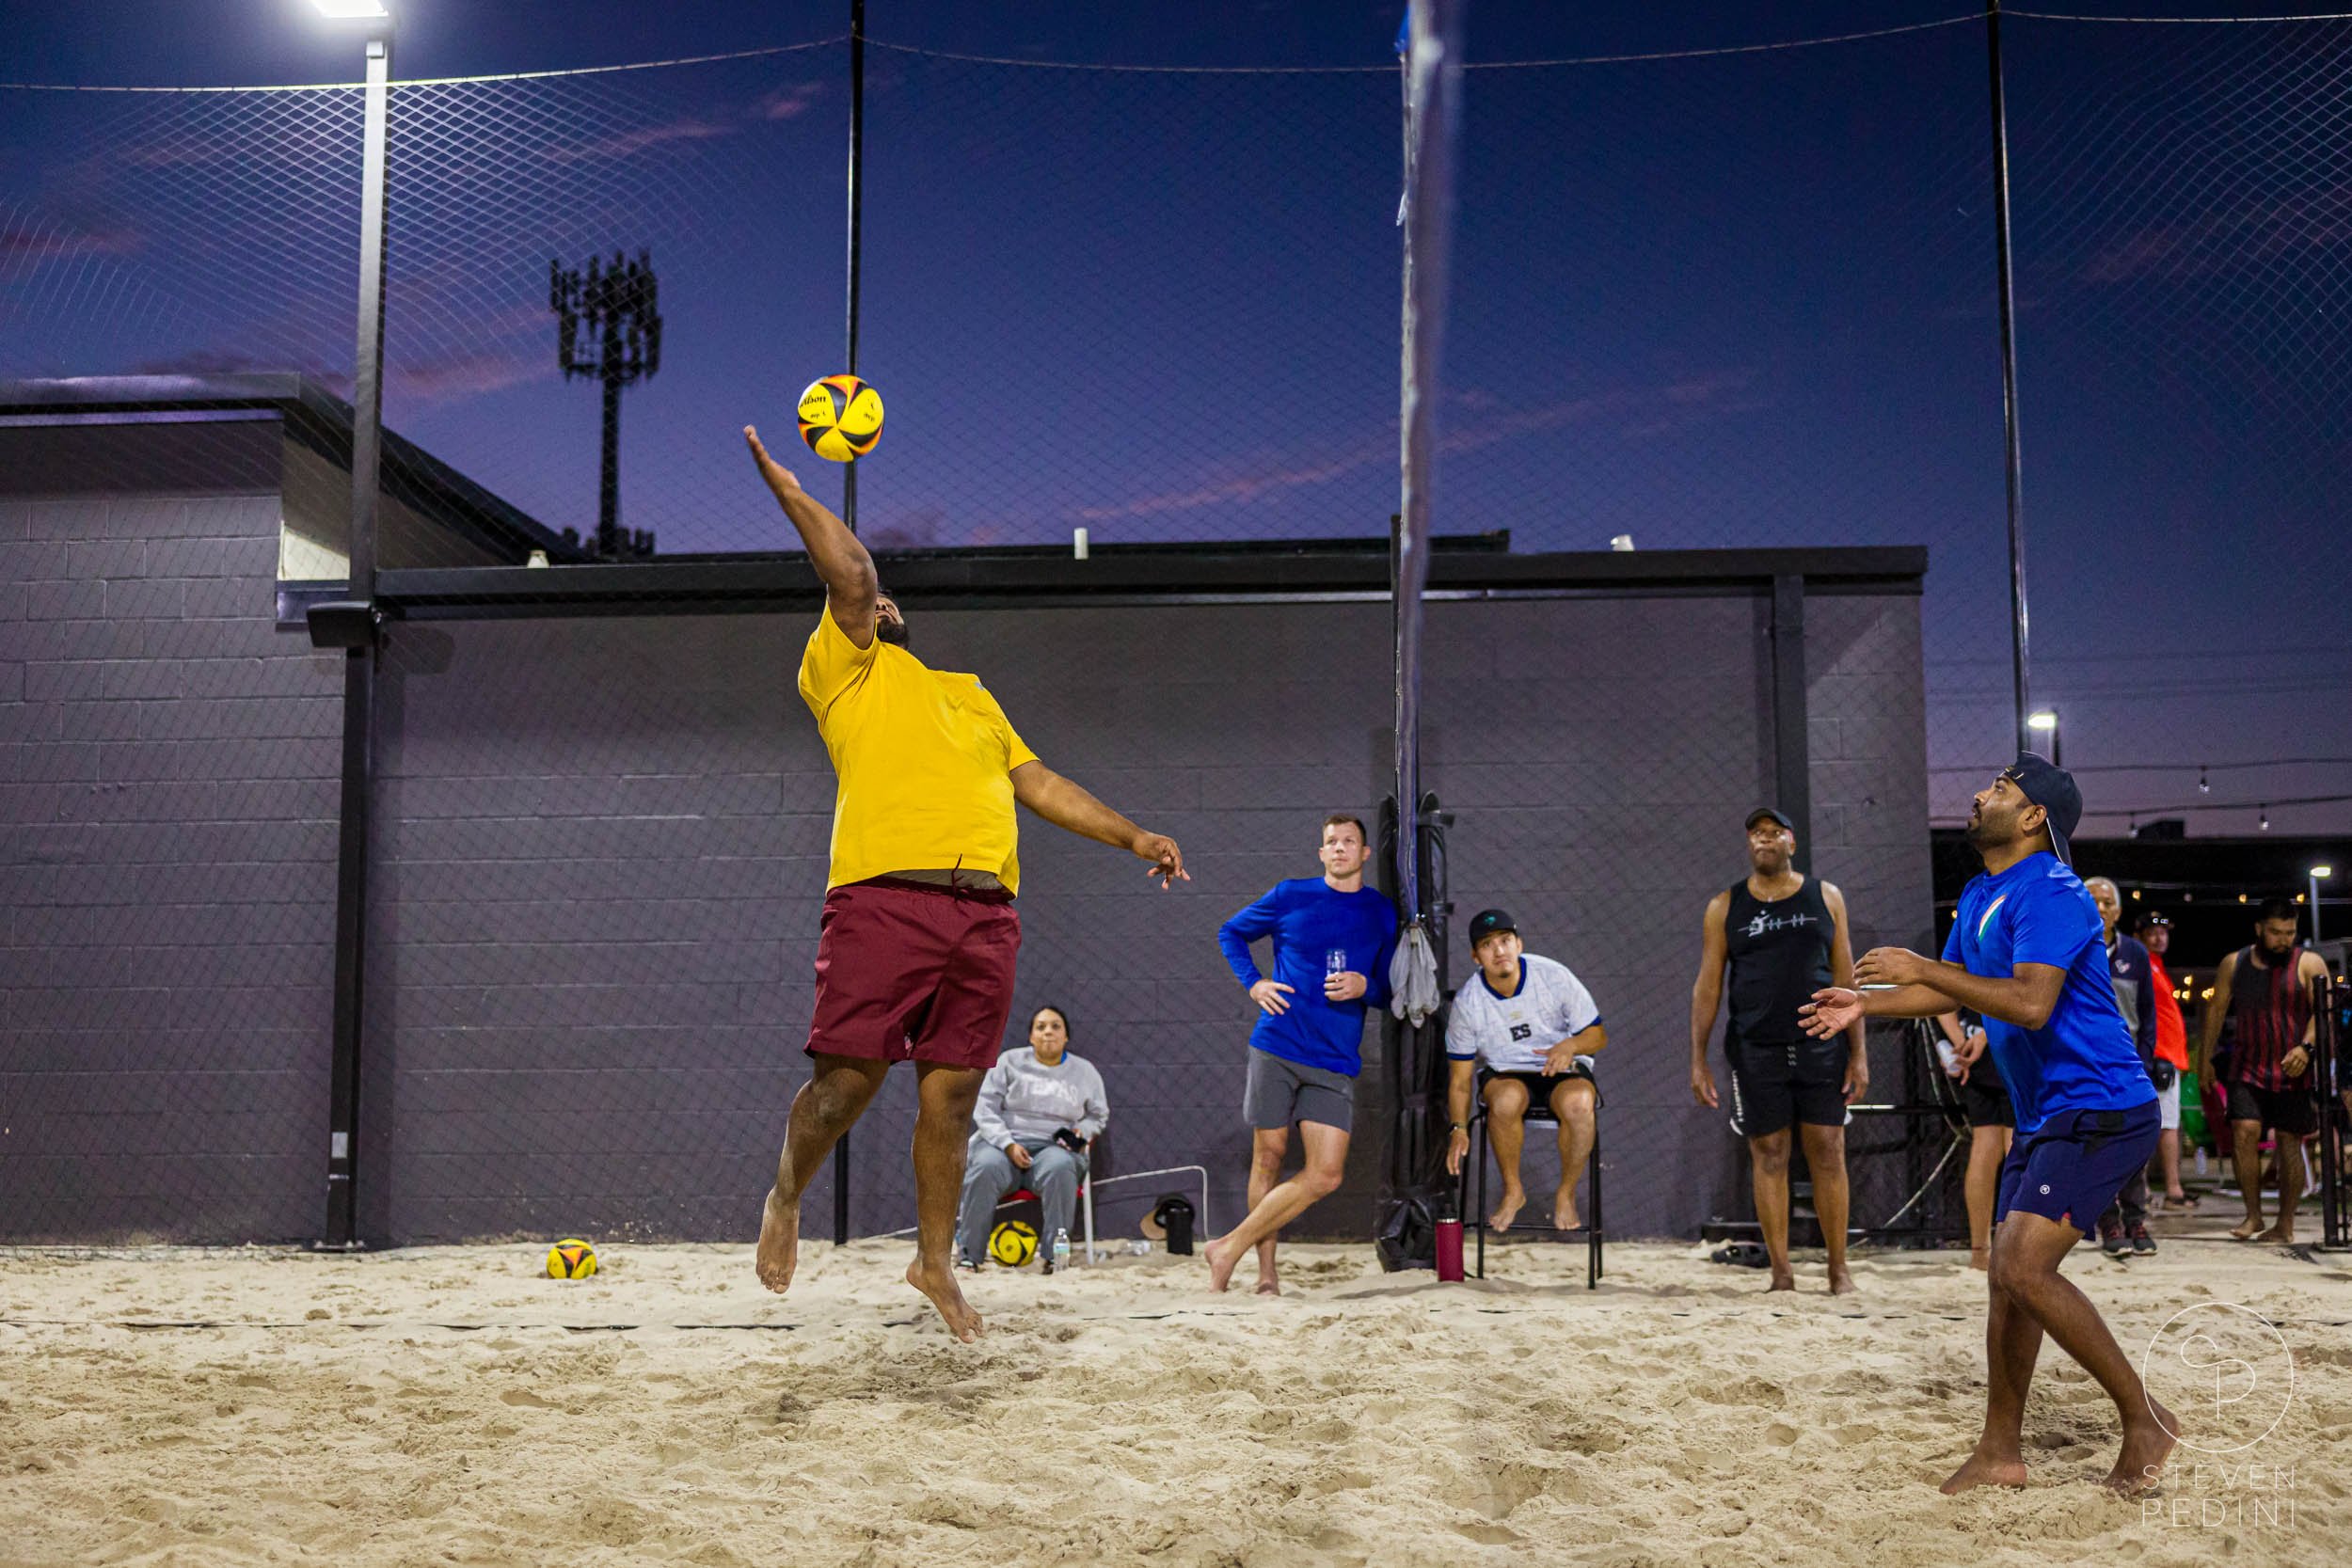 Steven Pedini Photography - Bumpy Pickle - Sand Volleyball - Houston TX - World Cup of Volleyball - 00330.jpg